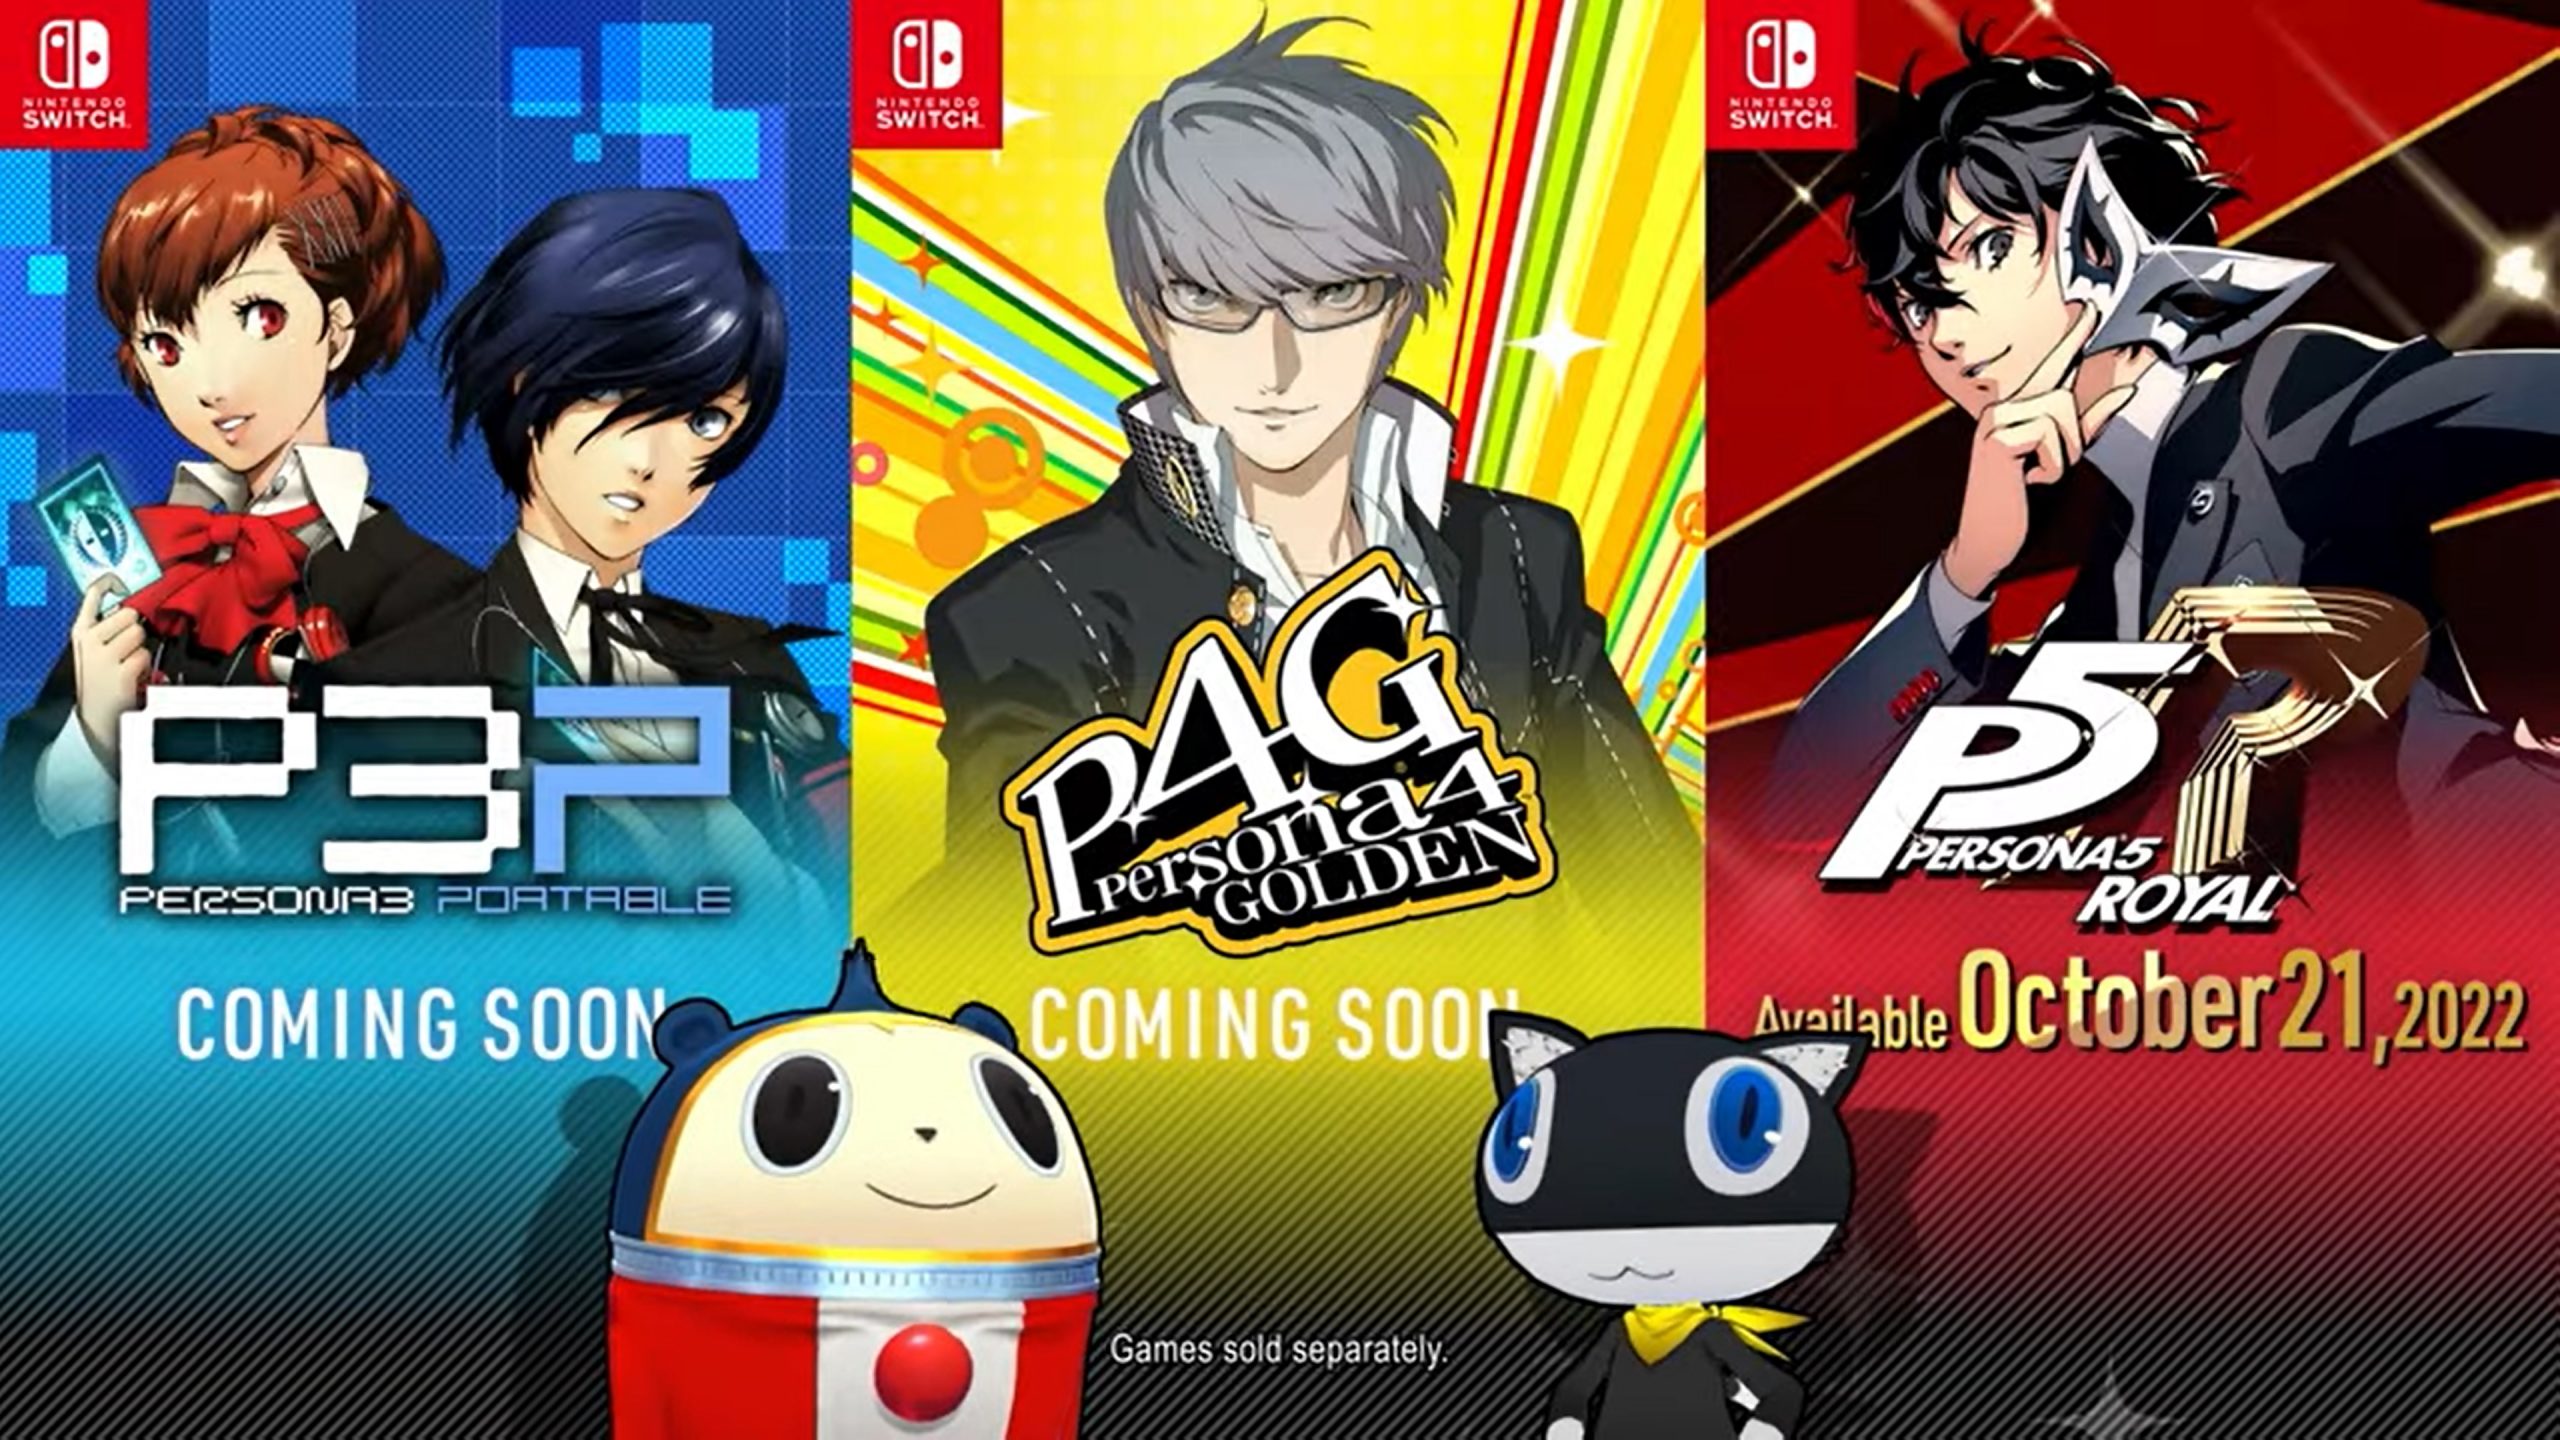 Persona 5 Royal, Persona 4 Golden, Persona 3 Portable coming to Switch